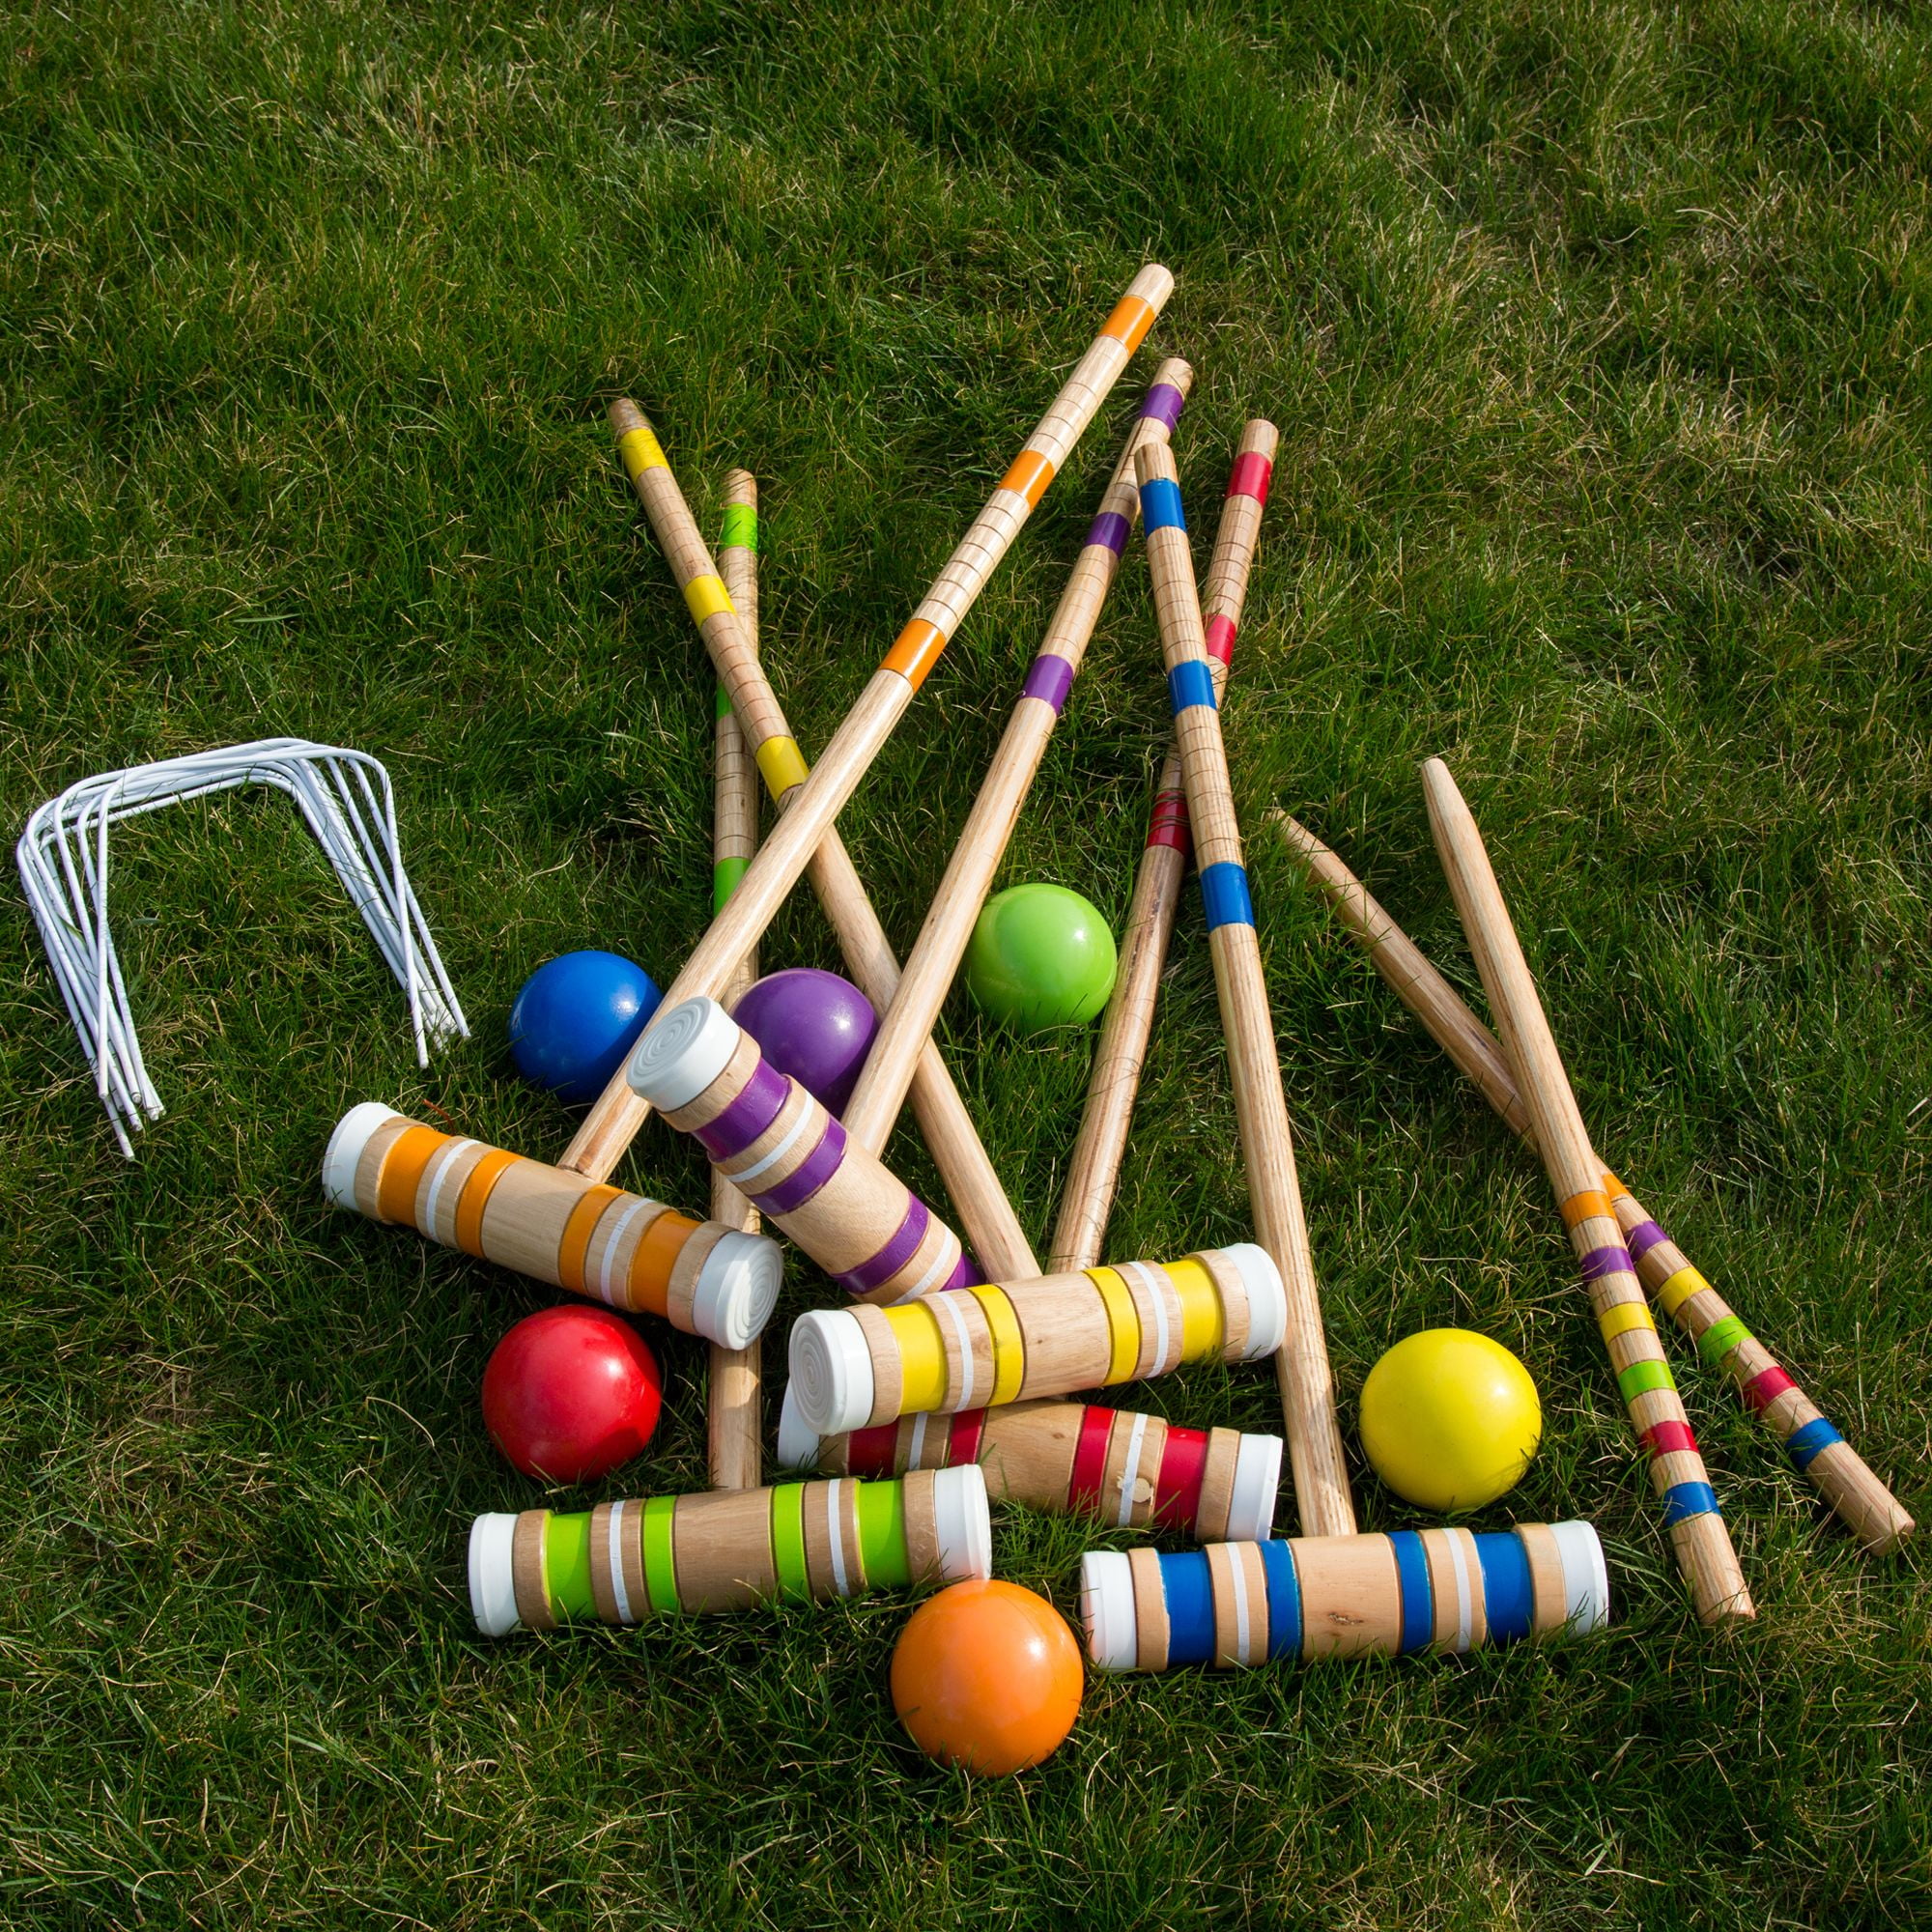 31-Inch Deluxe Croquet Game Set for Family Includes Extra Large Carrying Bag Durable Hardwood Material LULULION Croquet Set for Kids and Adults 6 Players 